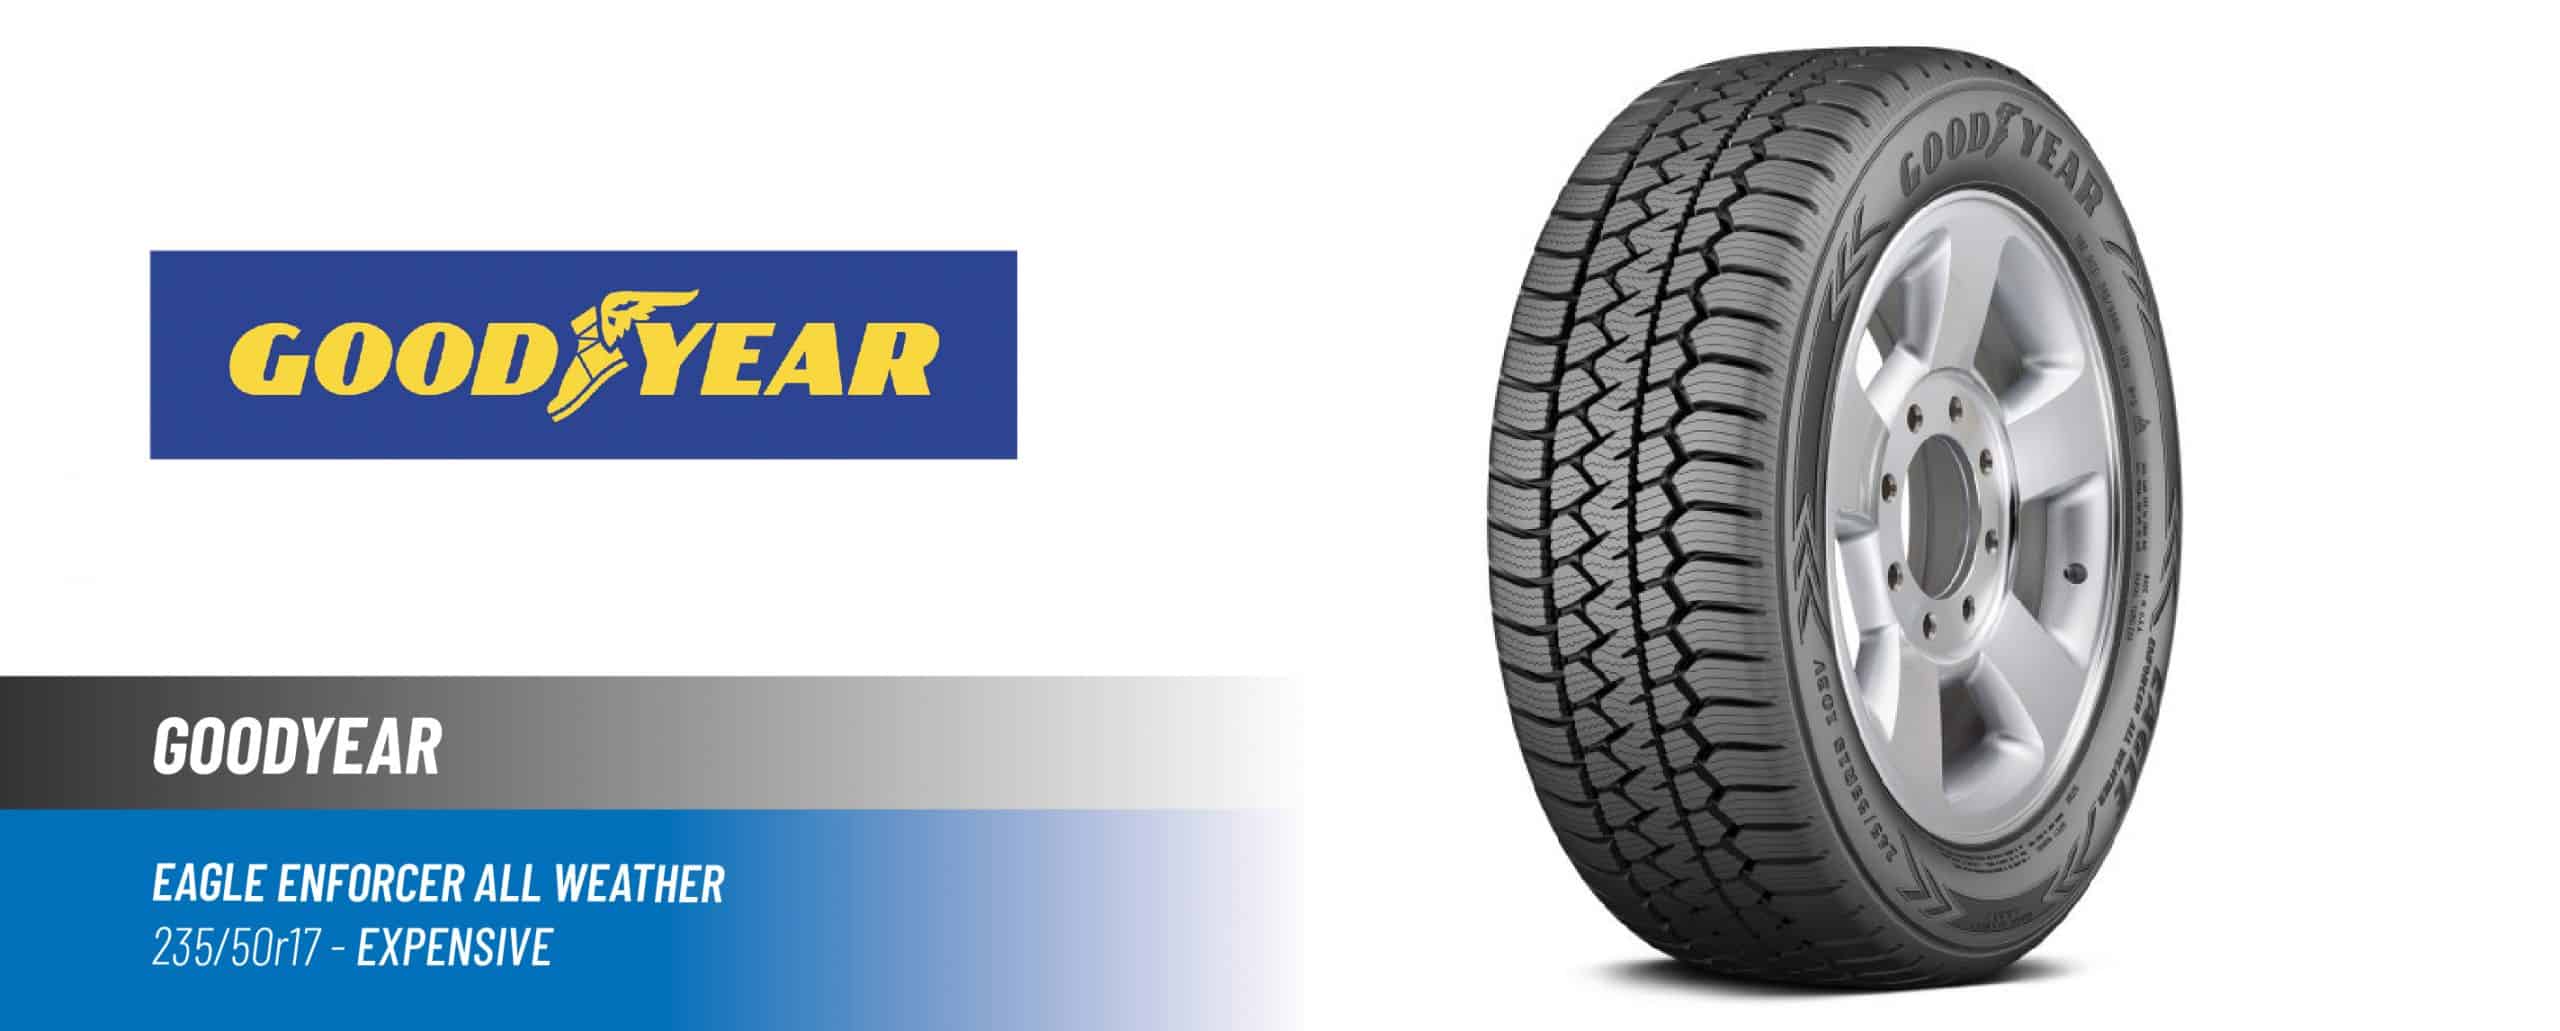 Top#4 Most Expensive: Goodyear Eagle Enforcer All Weather – 235/50 R17